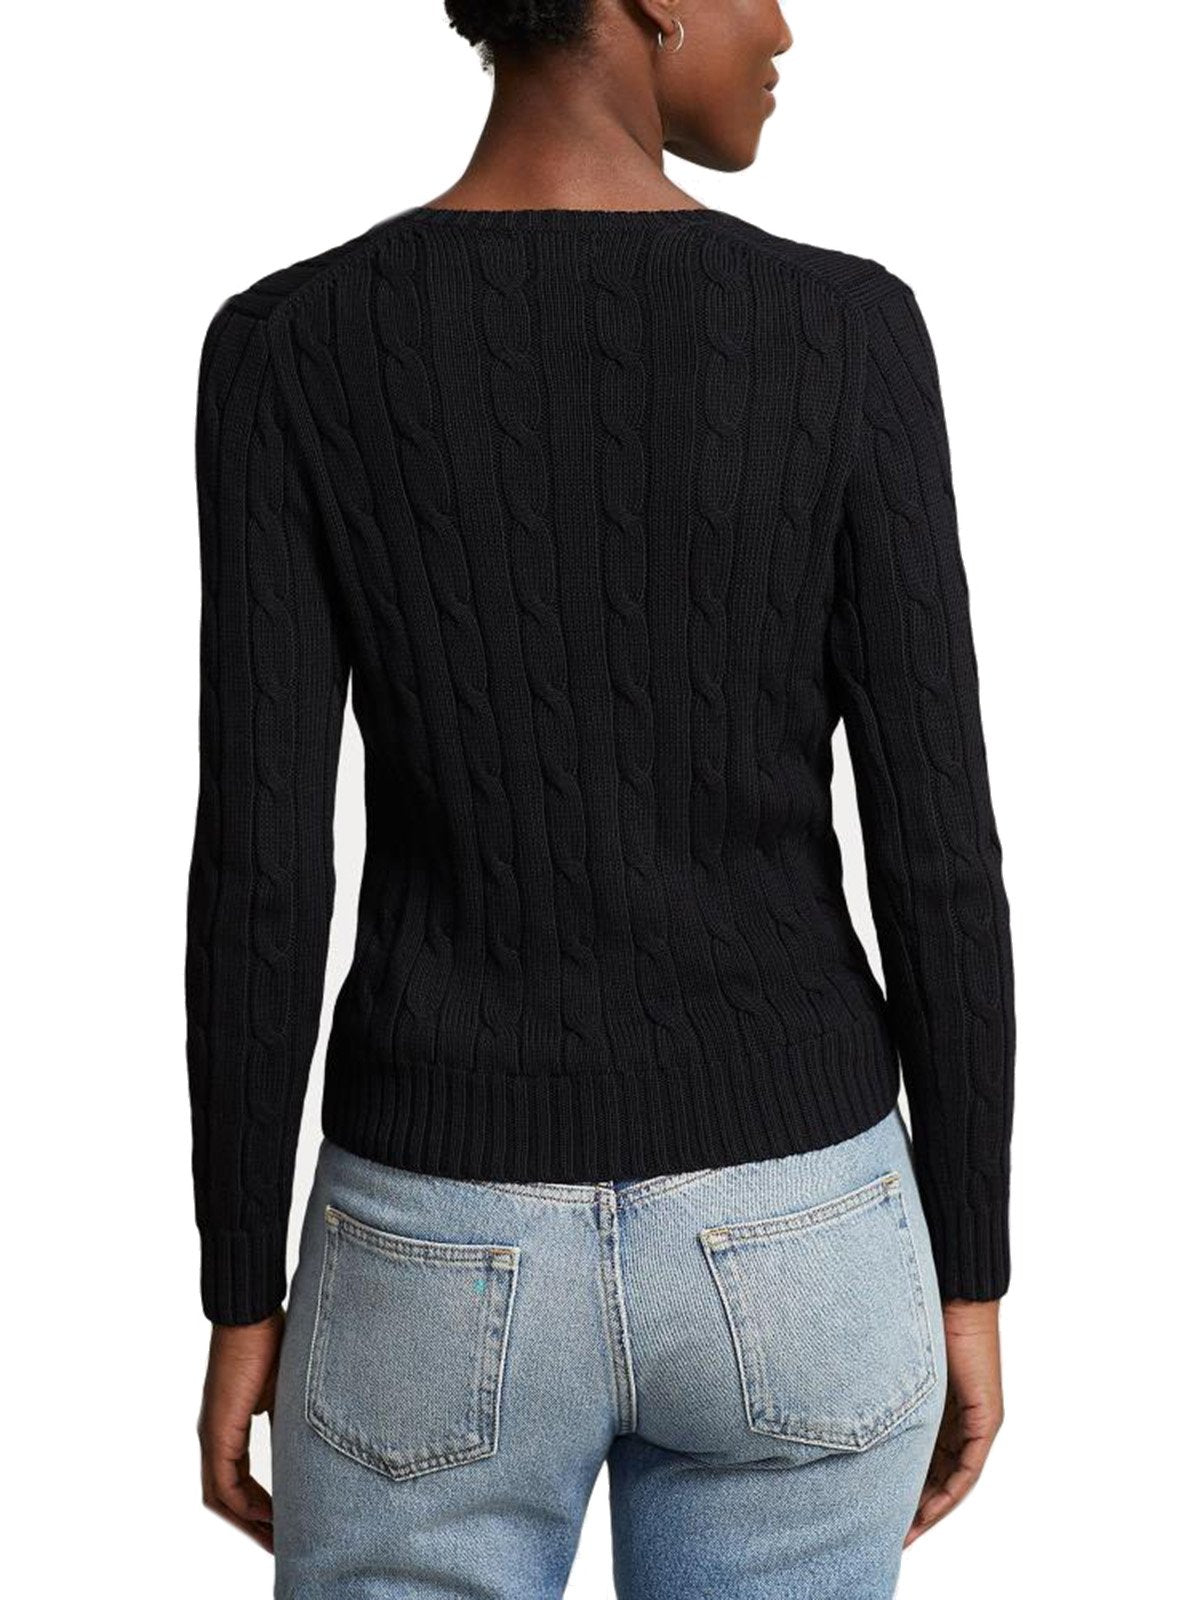 Maglioni Donna Ralph Lauren - Kimberly Cable-Knit V-Neck Cotton Sweater - Nero